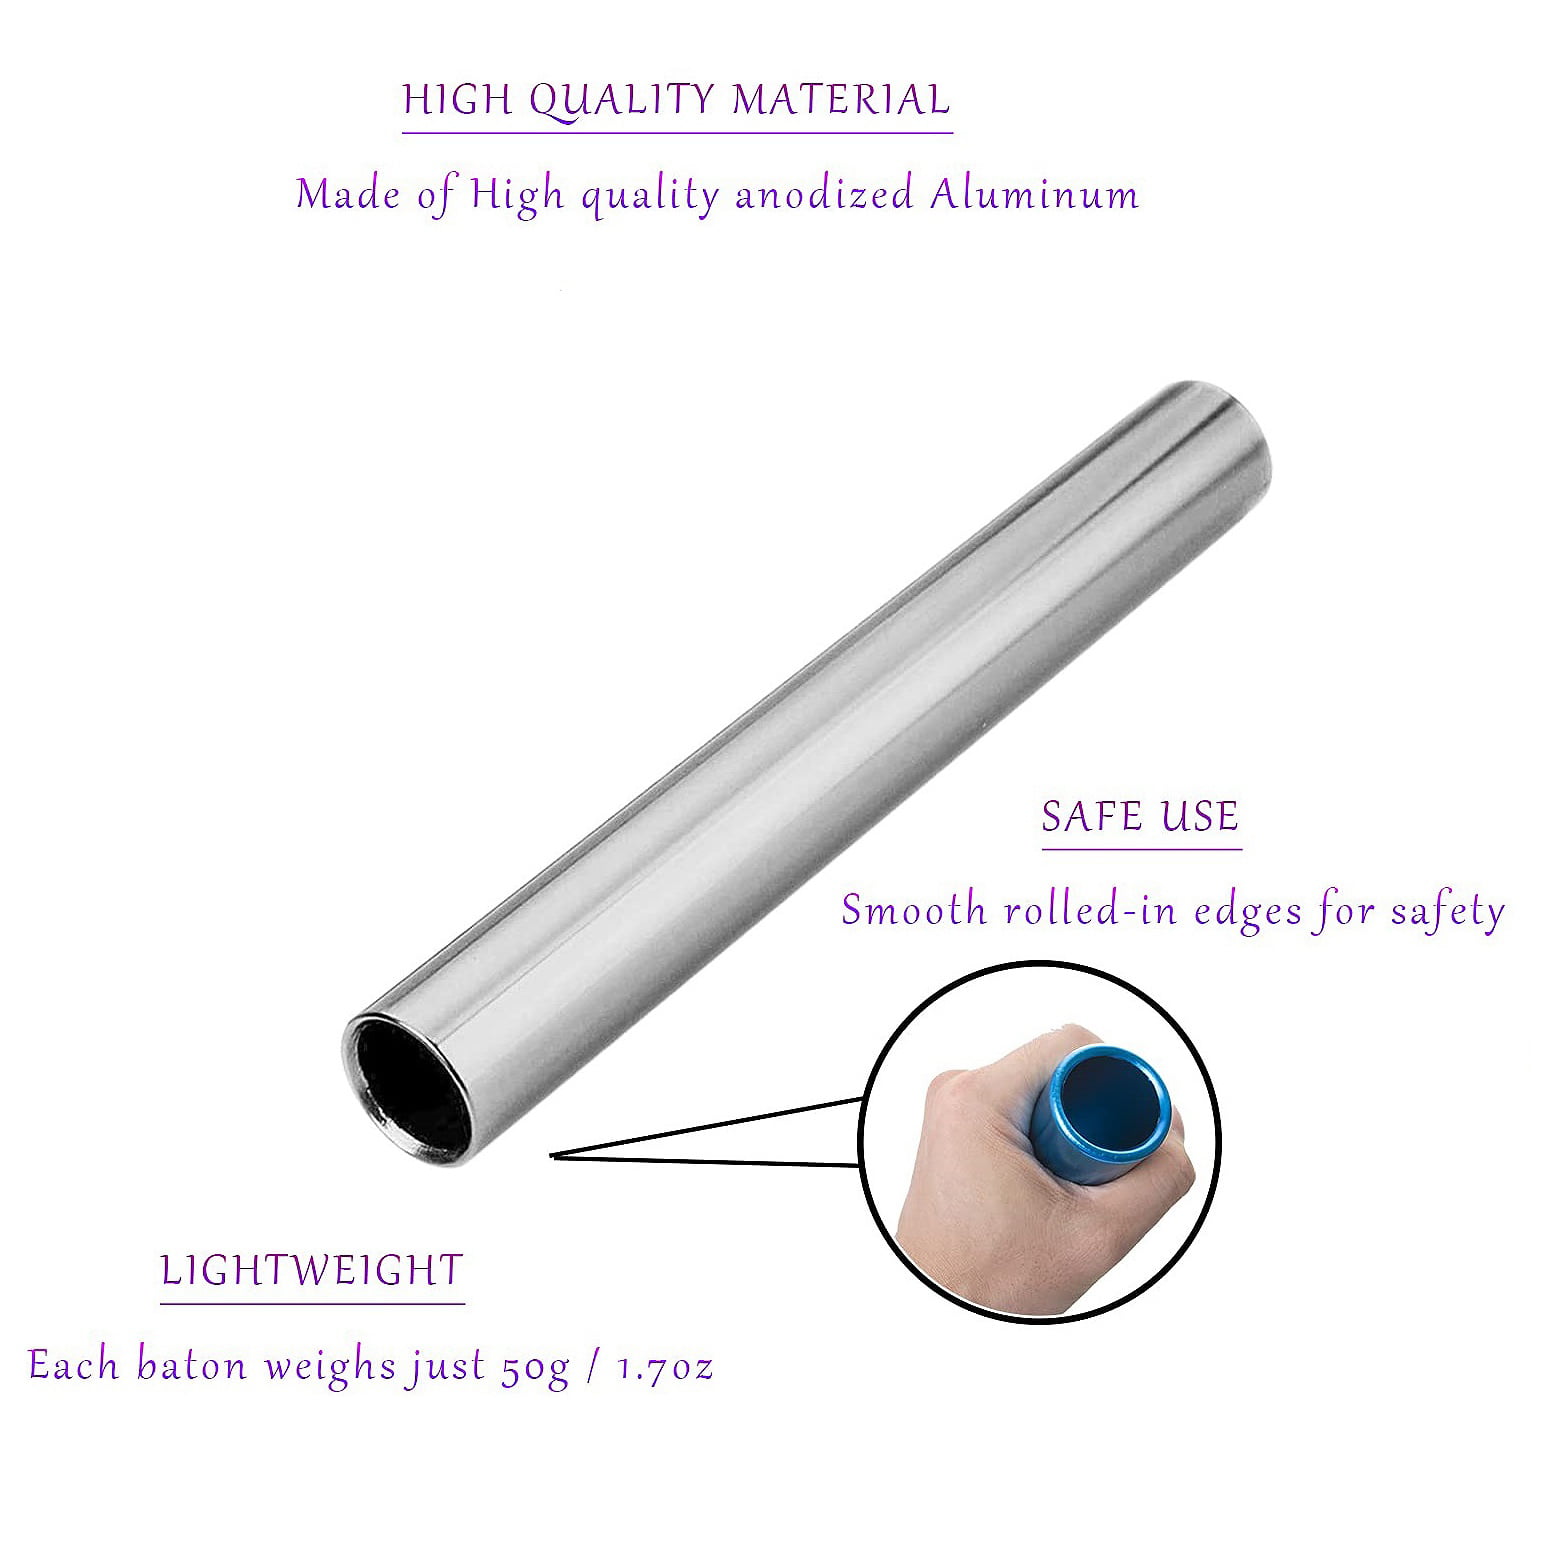 New Lightweight Anodized Aluminum Relay Baton for Track and Field Silver 